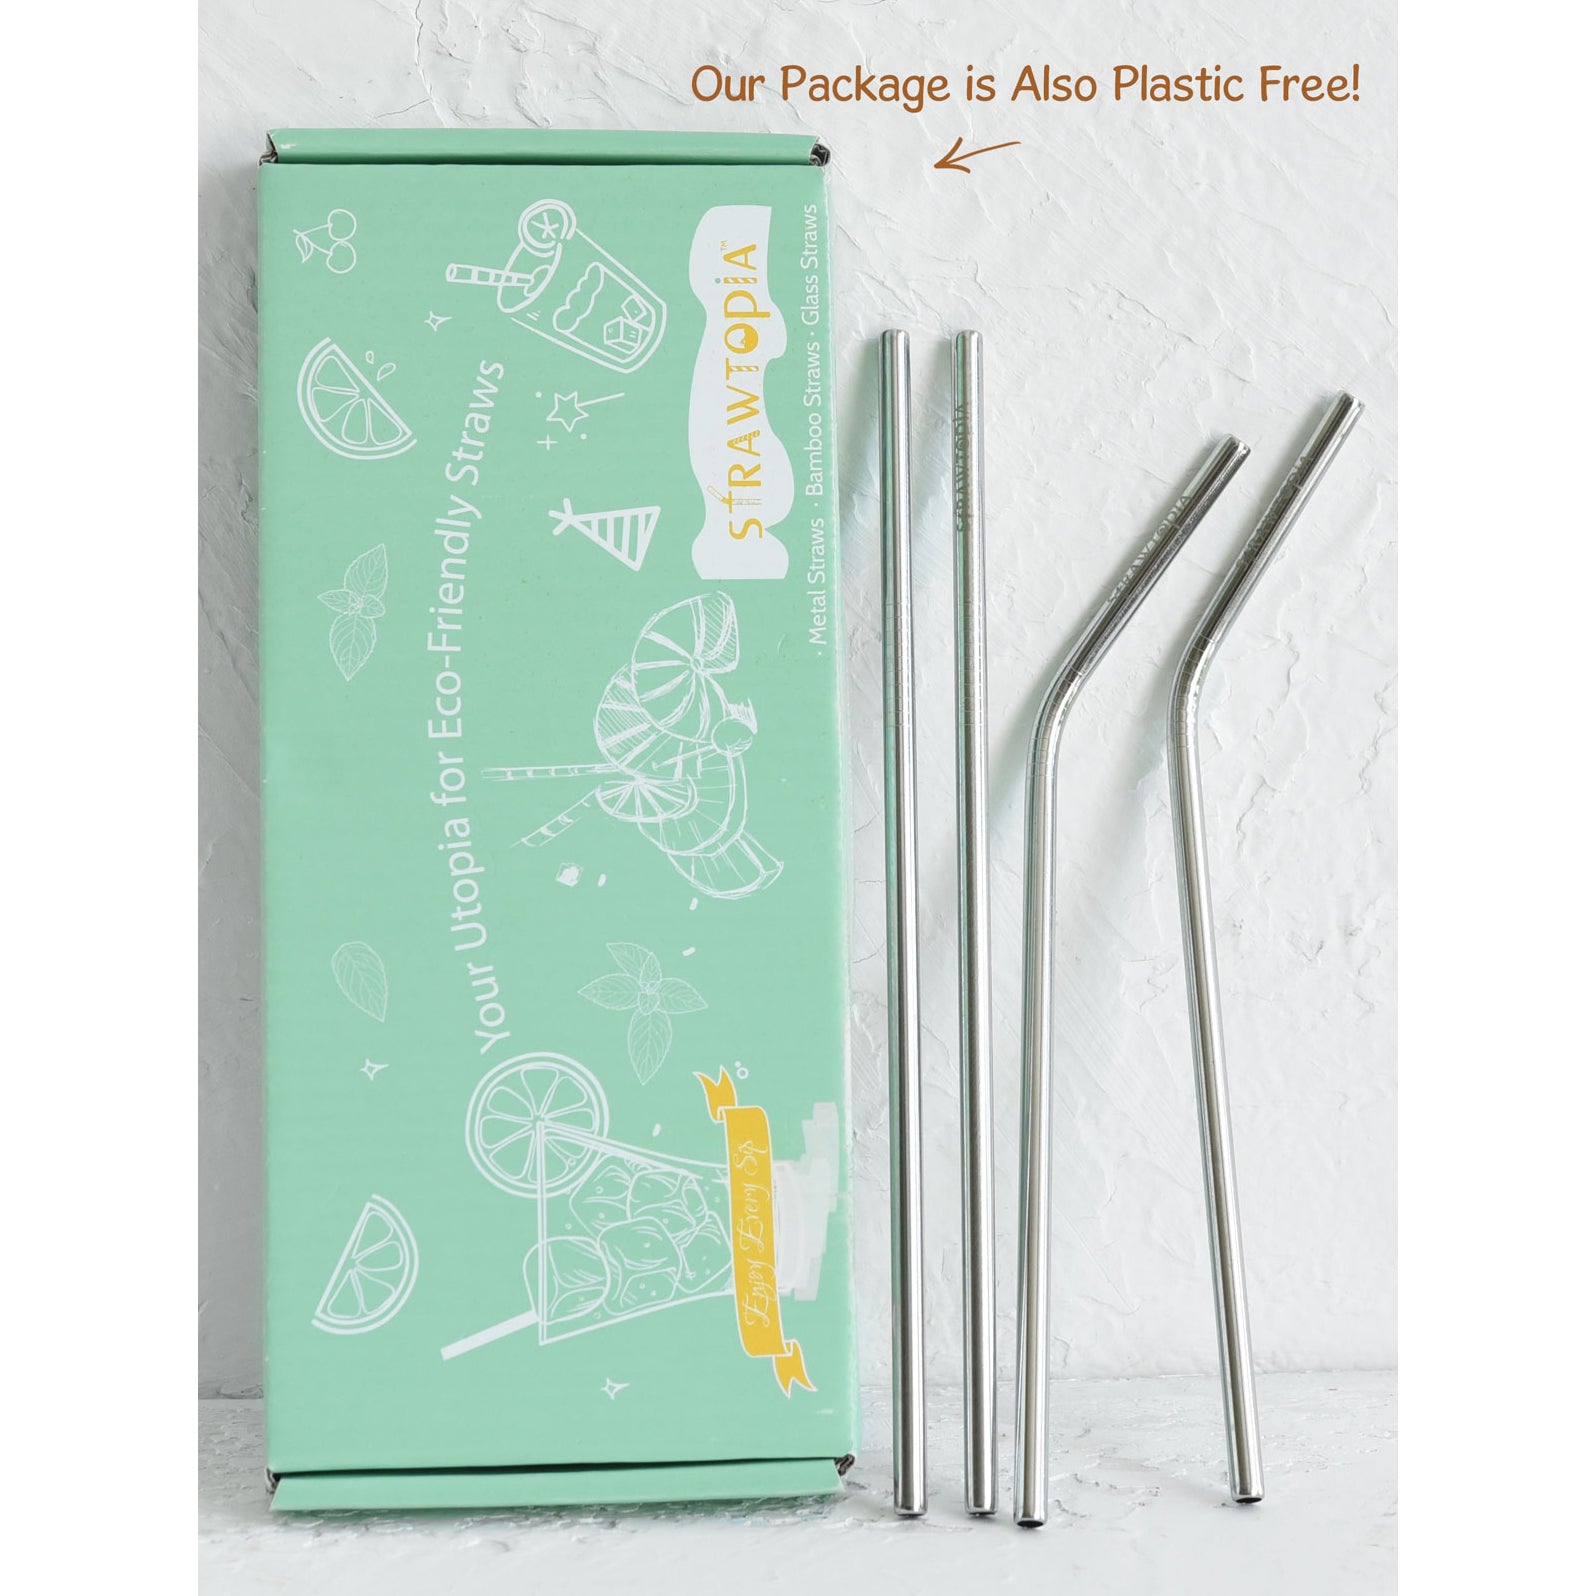 Reusable Stainless Steel Metal Drinking Straws - 8.5 inch (6 Thin Straight/6 Thick Straight Straws) w/ 2x Cleaning Brushes - 12 Pack